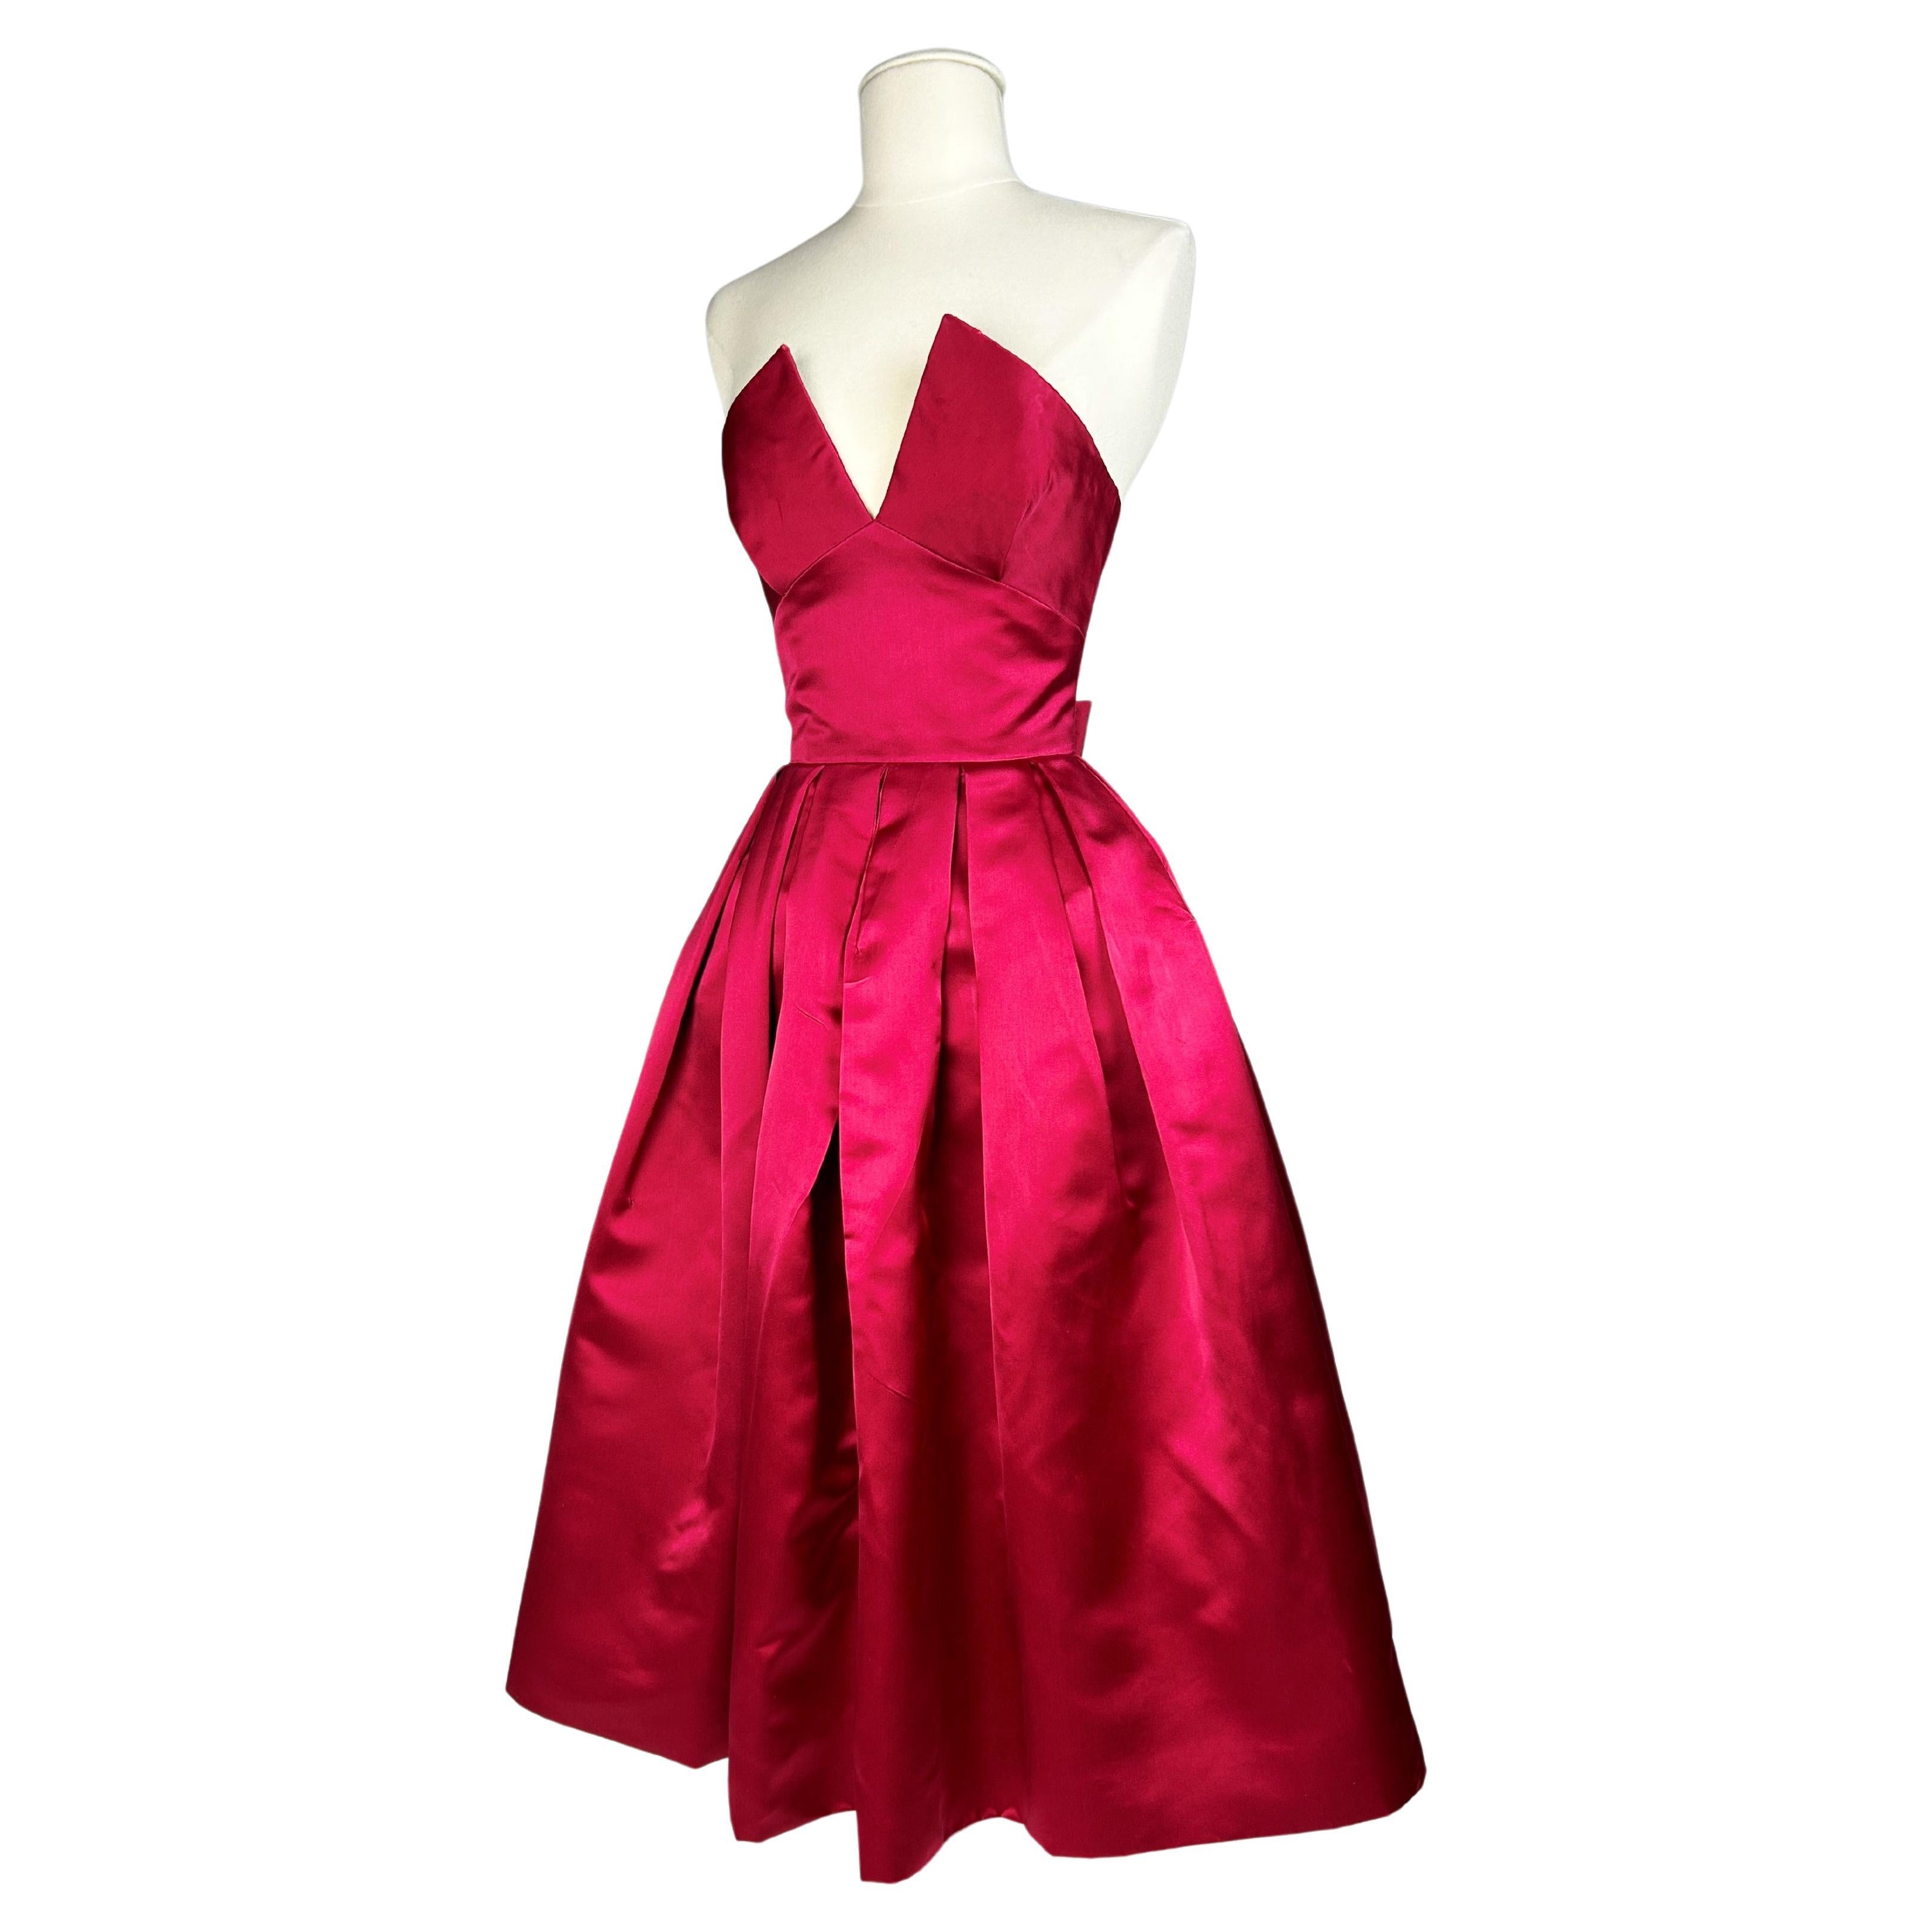 Cocktail dress in raspberry satin in the style of Christian Dior - Paris C. 1955